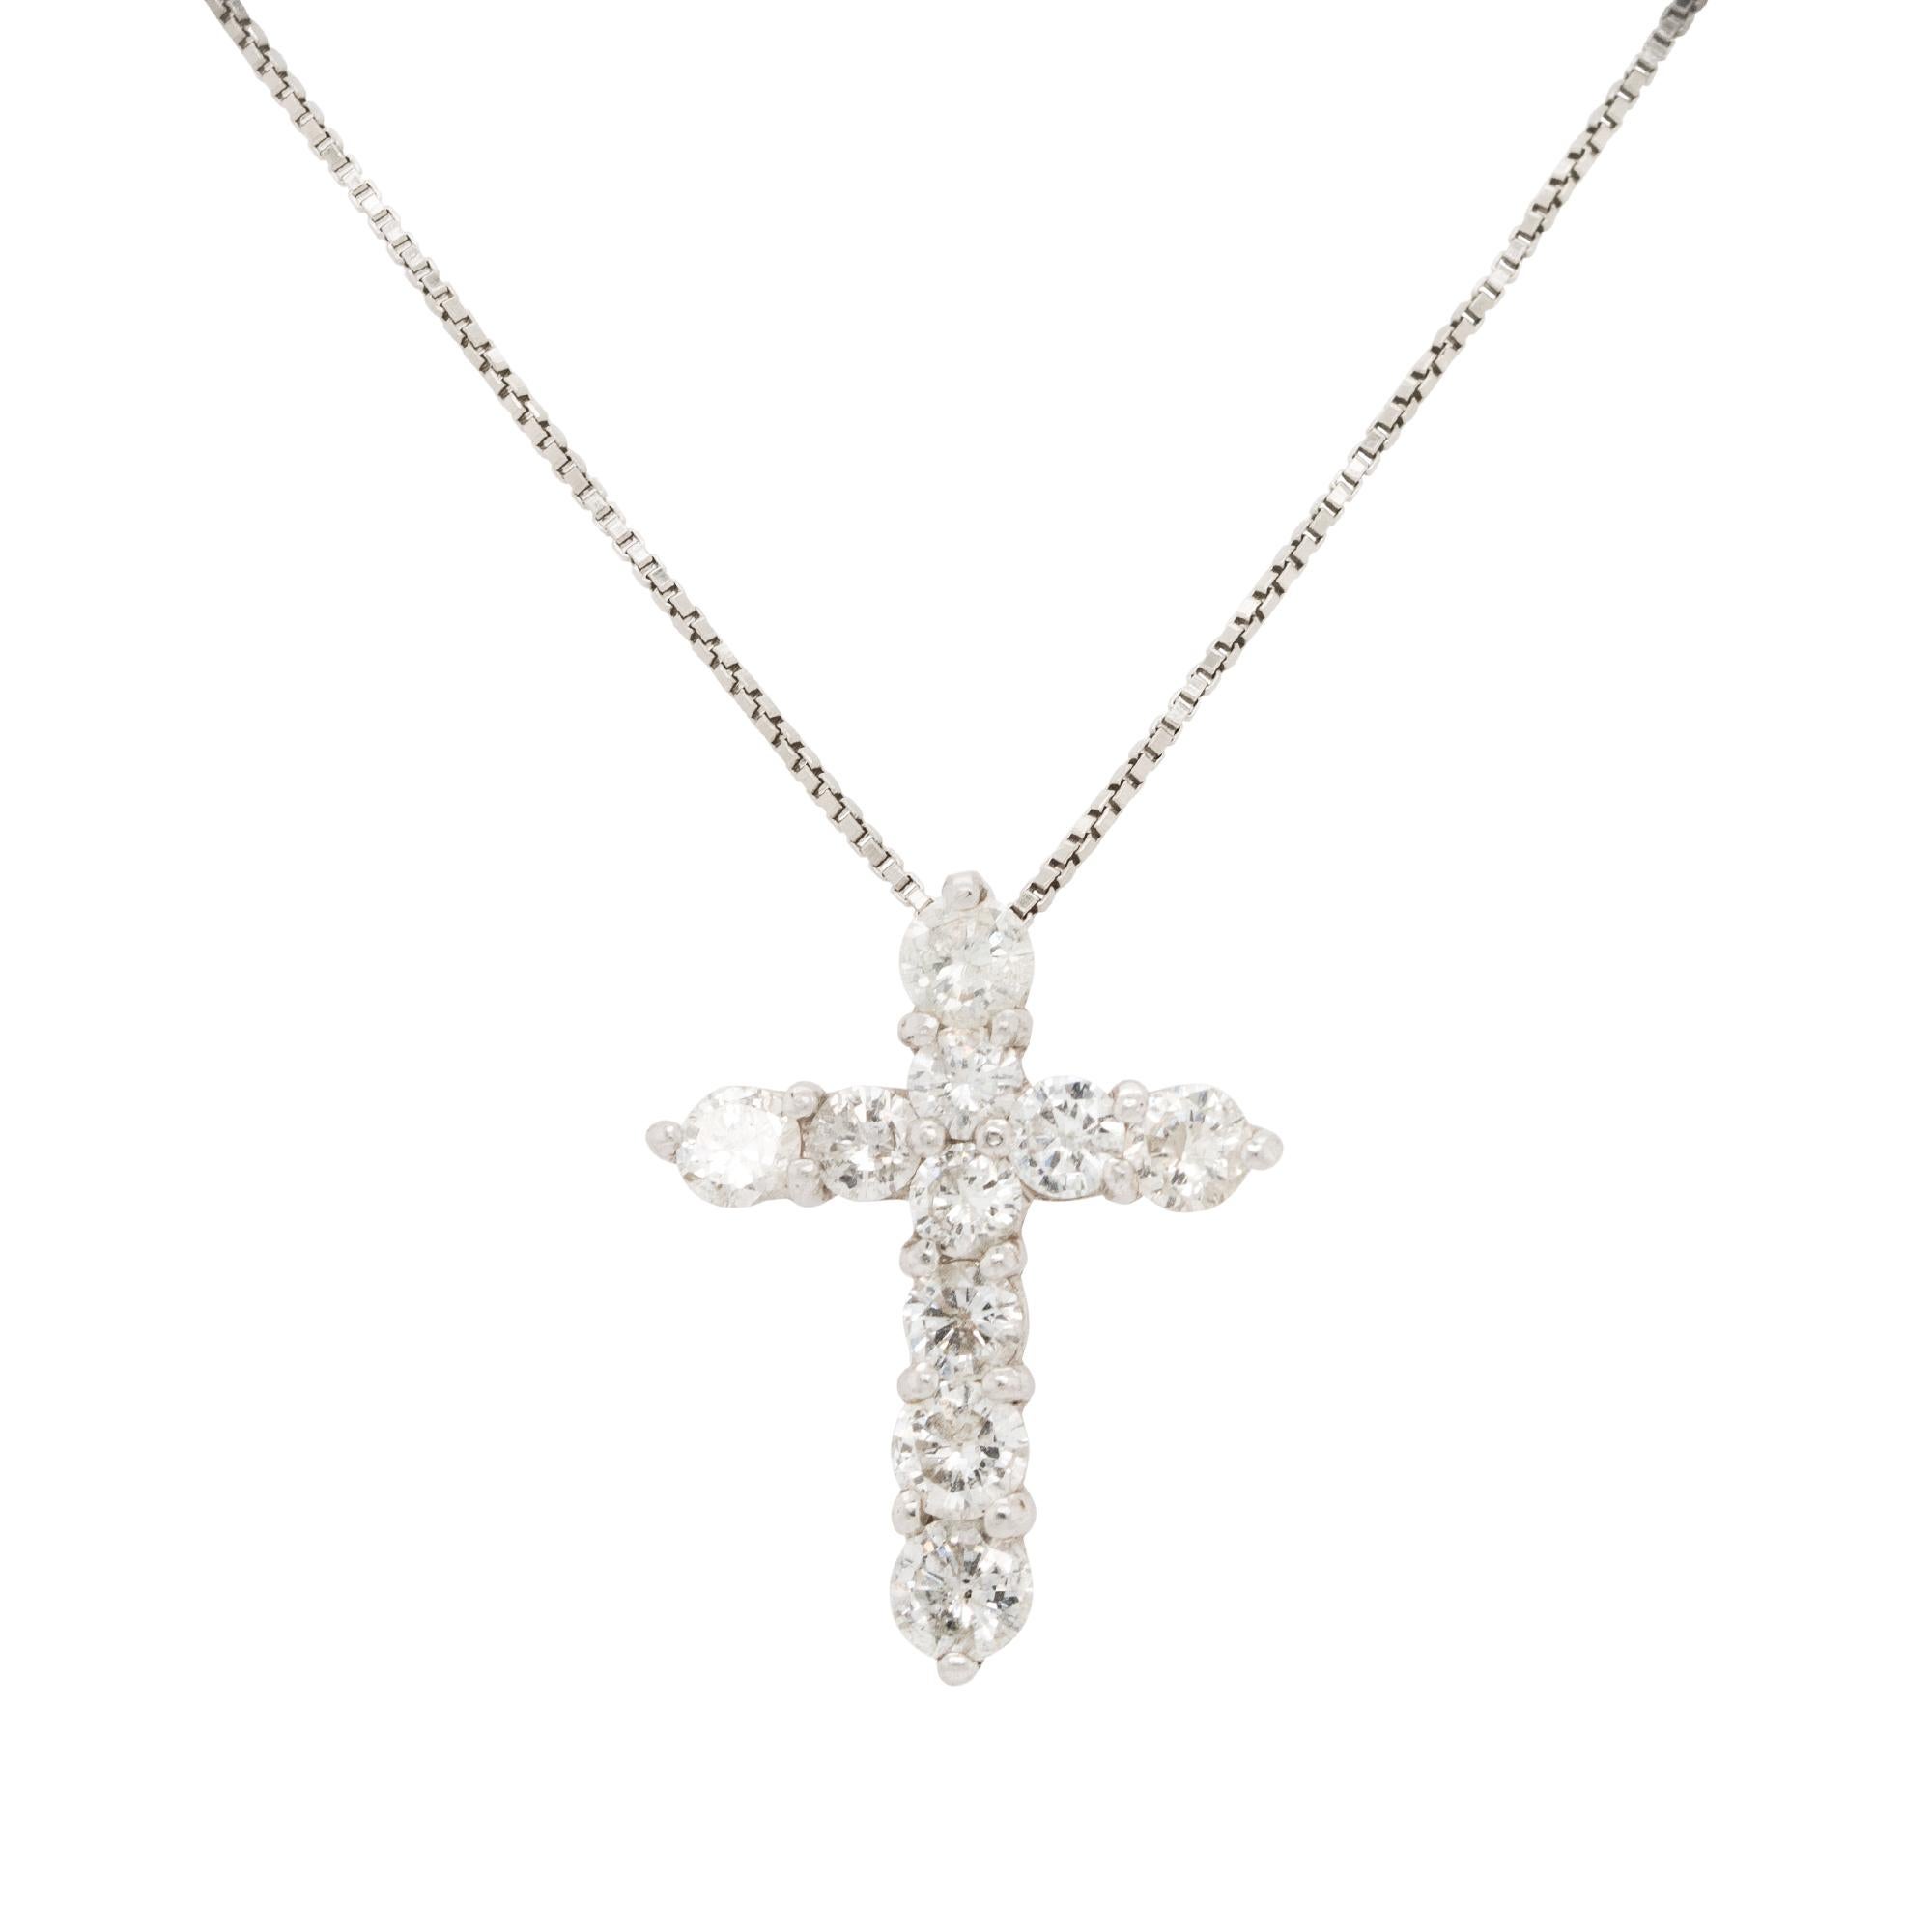 Platinum: 1ctw Round Diamond Small Cross Pendant Necklace
Material: 18k White Gold
Diamond Details: Approx. 1ctw of round cut Diamonds. Diamonds are G/H in color and VS in clarity
Pendant Measurements: n15.5mm x 3mm x 20mm
Length: 16 inches